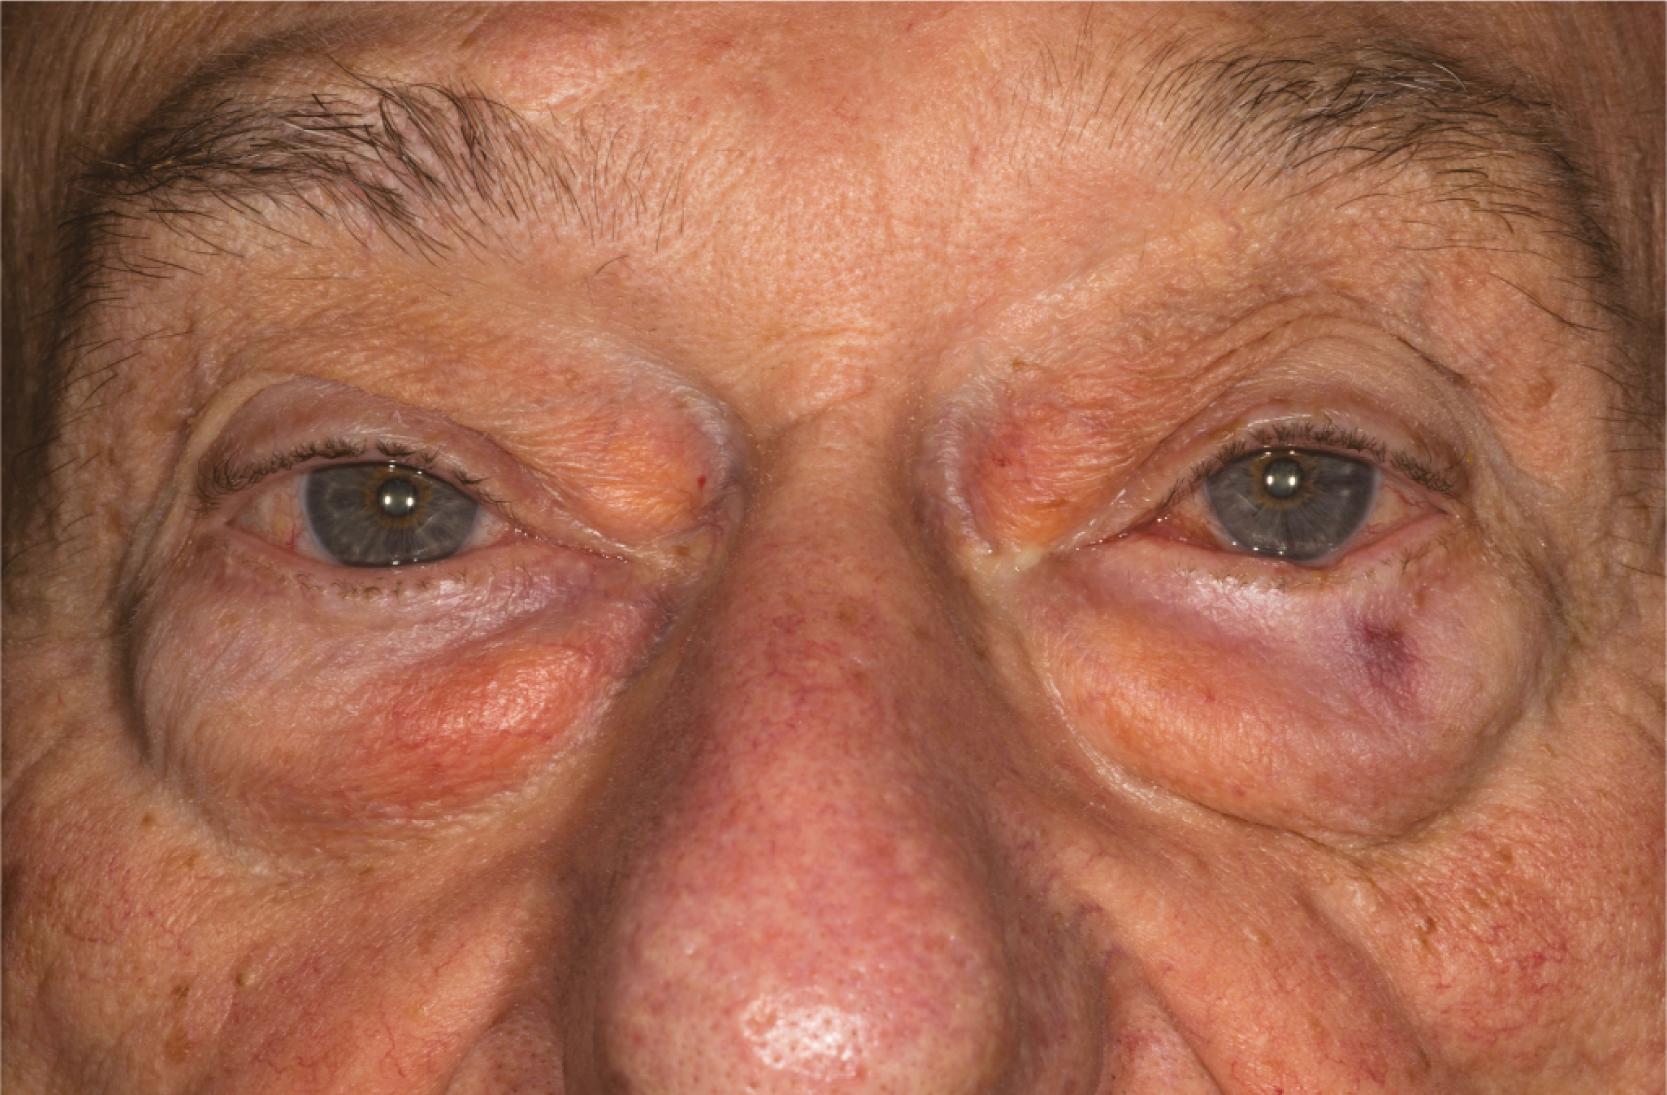 Figure 6.13, Upper and lower eyelid fat prolapse. Note prolapse of upper medial fat pads and all three lower eyelid fat pads. Also note the upper eyelid ptosis and small incisional biopsy site on the left lower eyelid for presumed basal cell carcinoma.